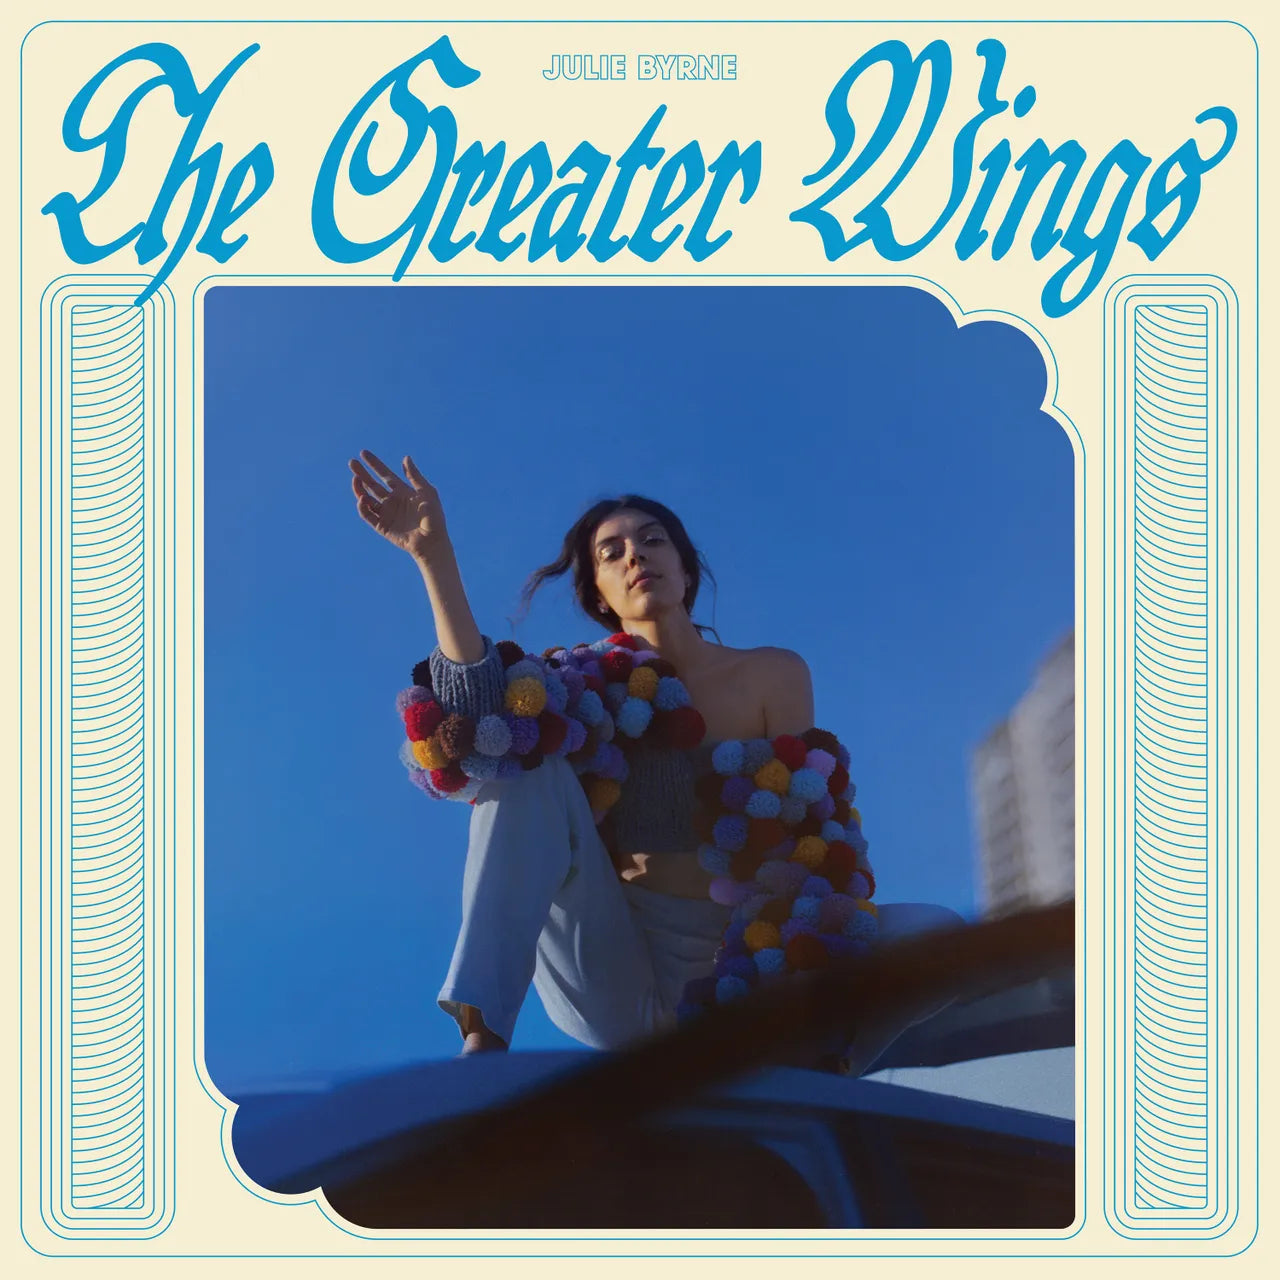 Julie Byrne ~ The Greater Wings